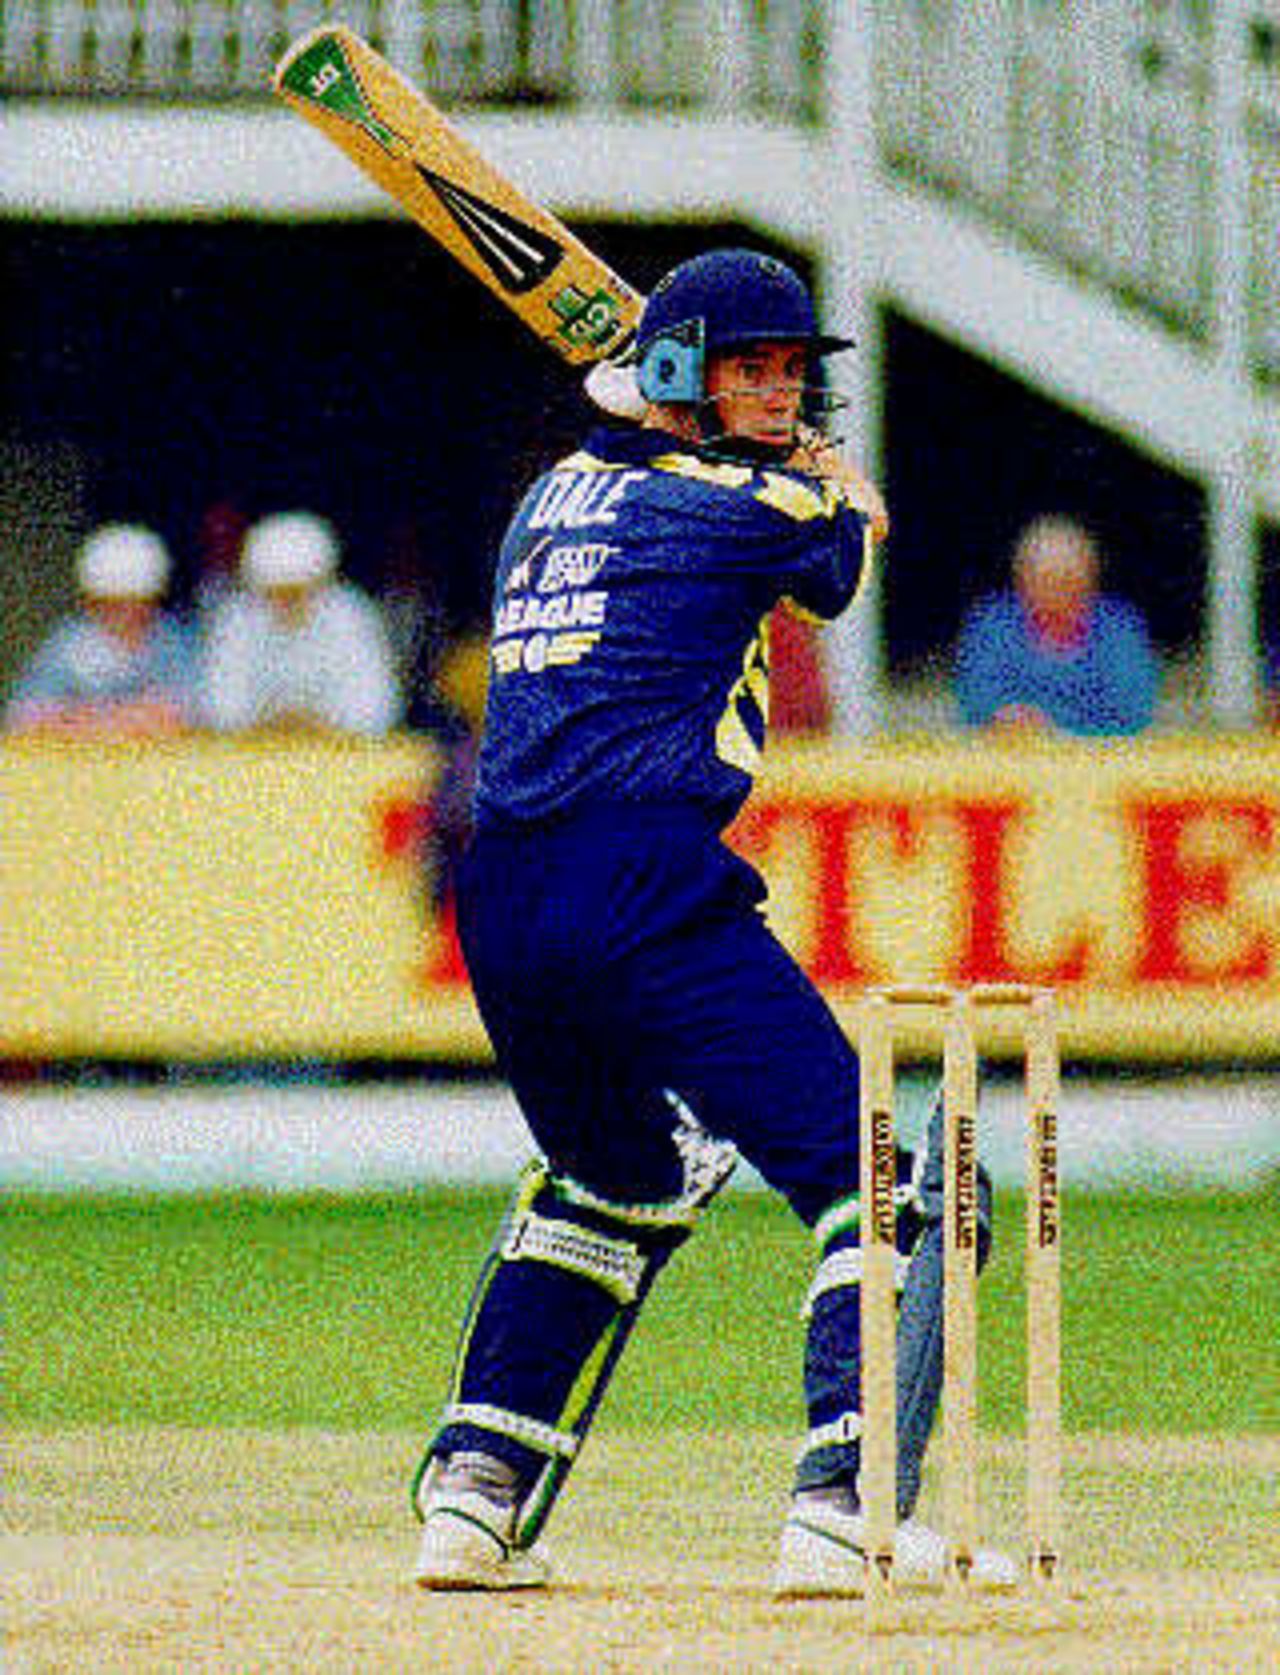 Adrian Dale cutting the ball to the boundary against Surrey in the 1994 Sunday League match at Swansea.